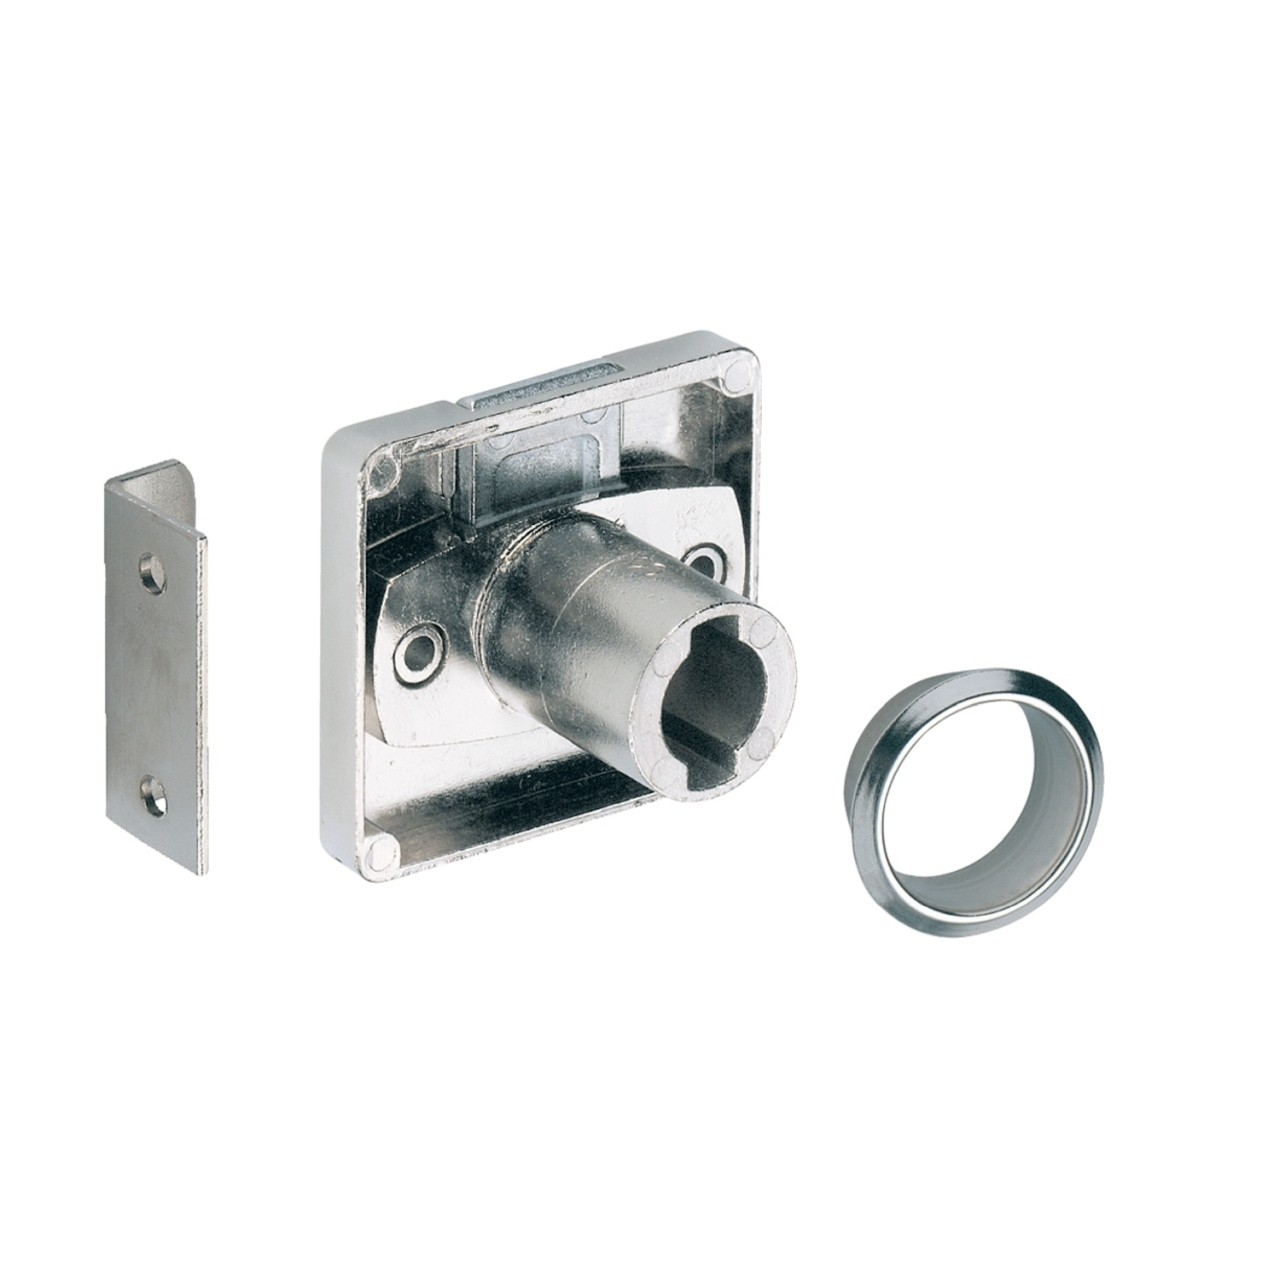 Buy HETTICH - Cylinder Drawer Lock Online | Construction Finishes | Qetaat.com